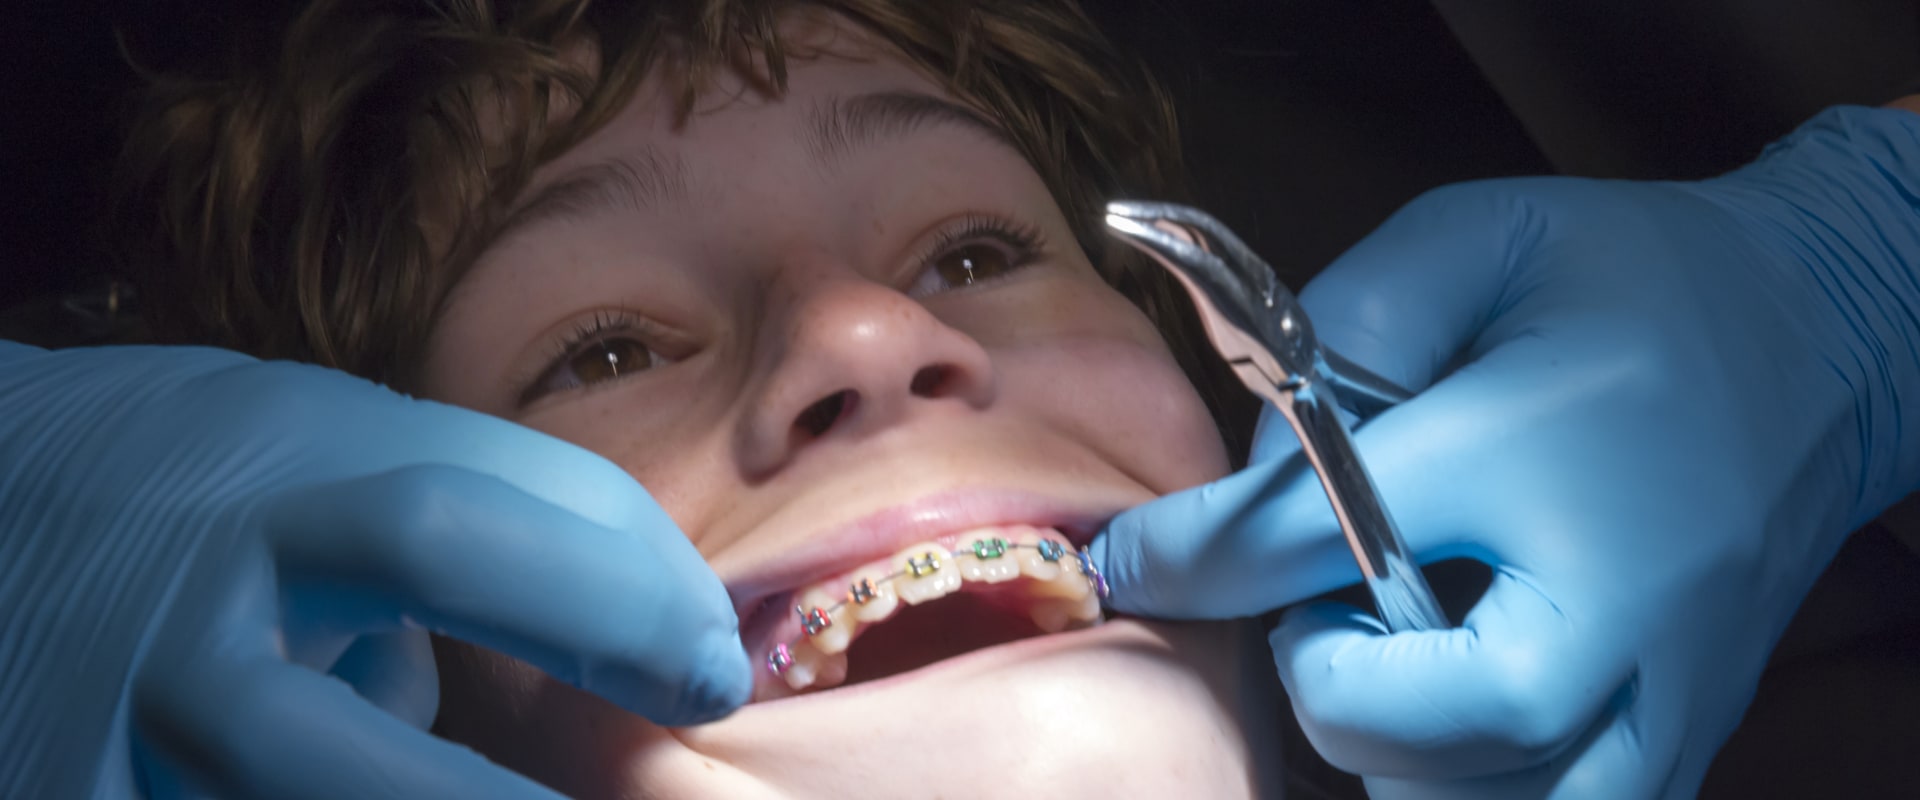 Do Orthodontists Need to Go Through Medical School?